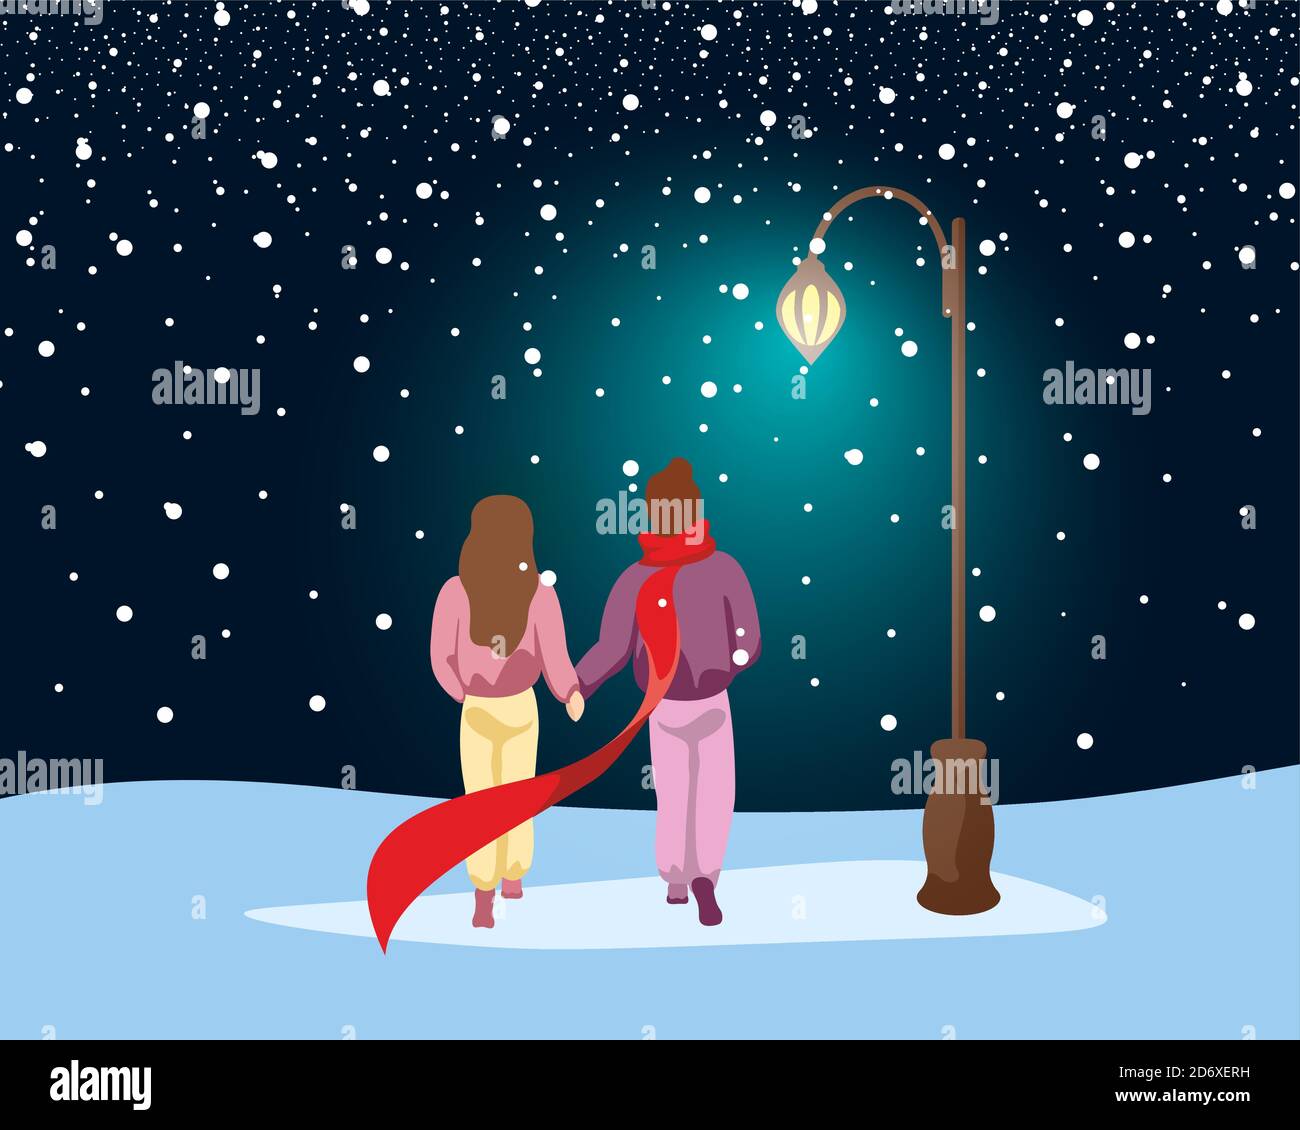 Couple in love walking in park under snow along path lit by street lantern. Male and female winter outdoors romantic evening under glowing lamp post. Human relationship concept vector eps illustration Stock Vector